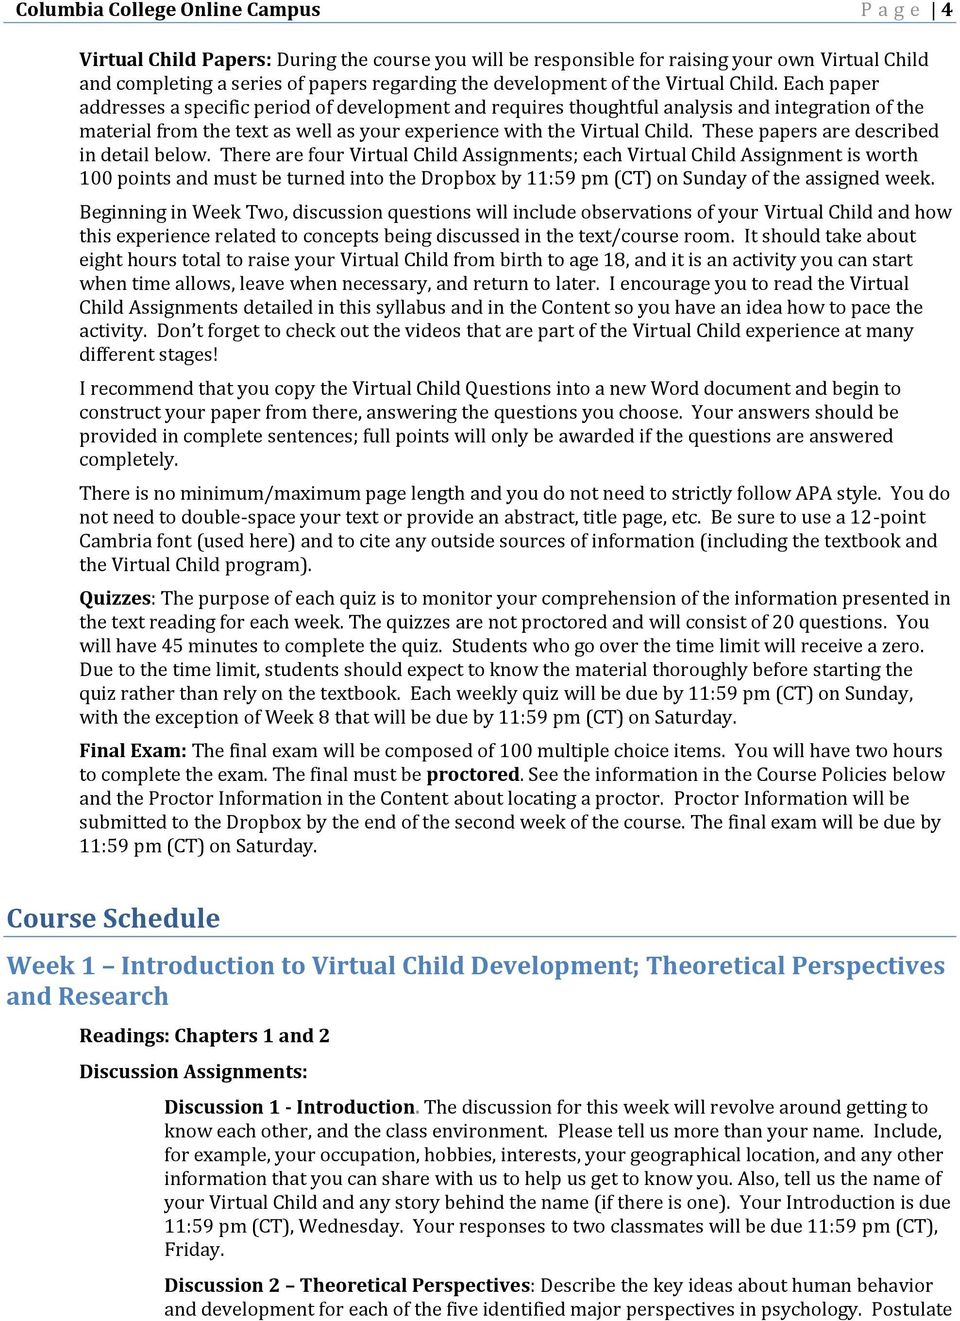 Each paper addresses a specific period of development and requires thoughtful analysis and integration of the material from the text as well as your experience with the Virtual Child.